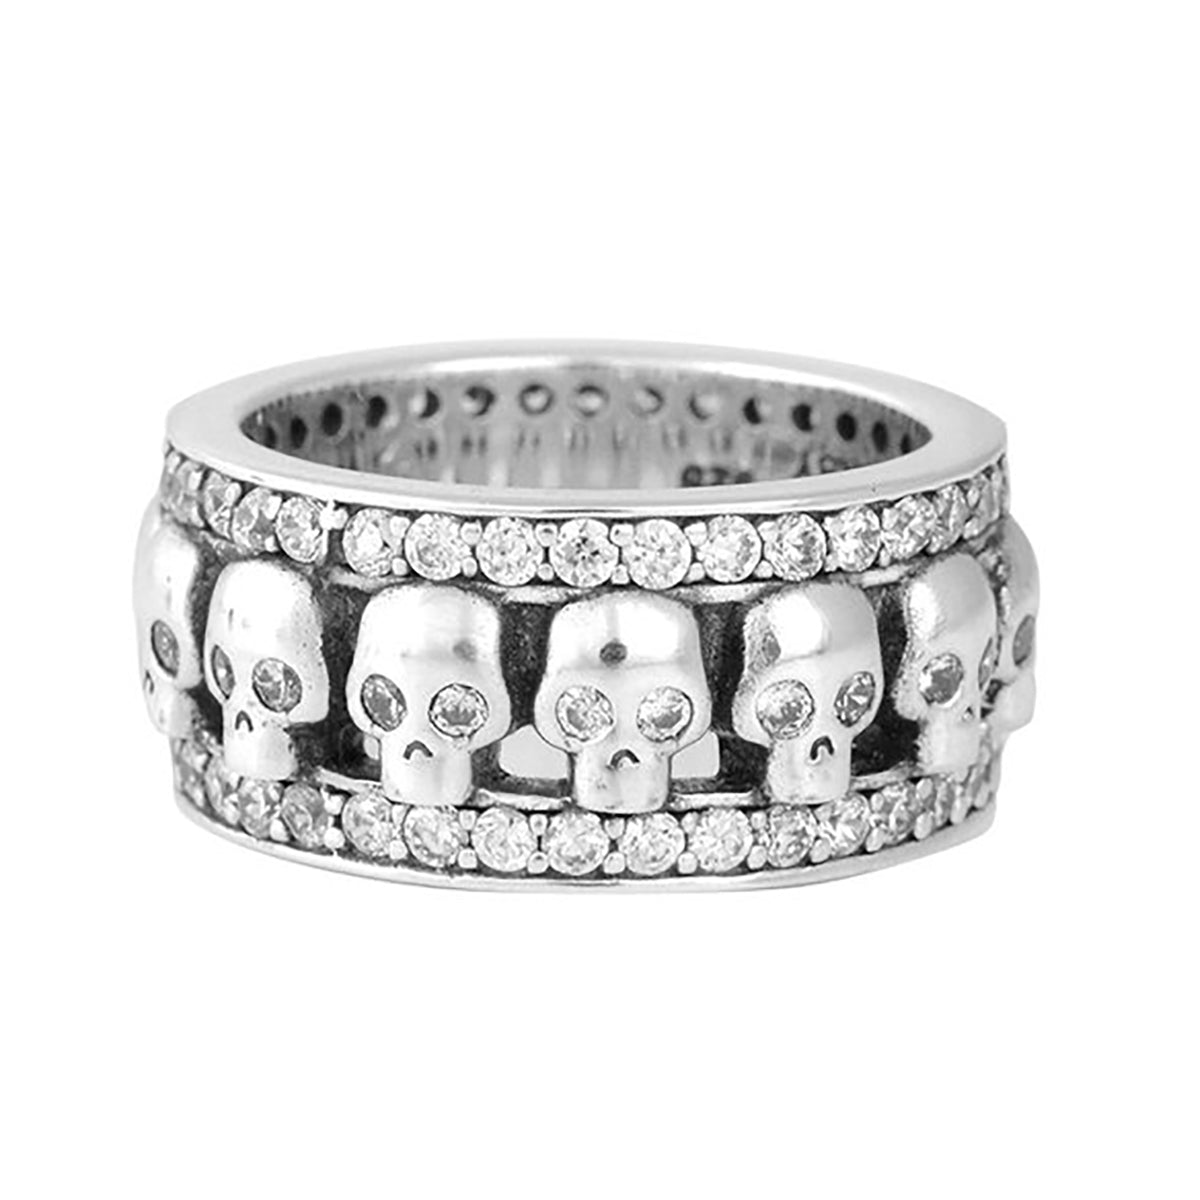 King Baby - &quot;WIDE BAND SKULL RING&quot; with Brilliant CZs